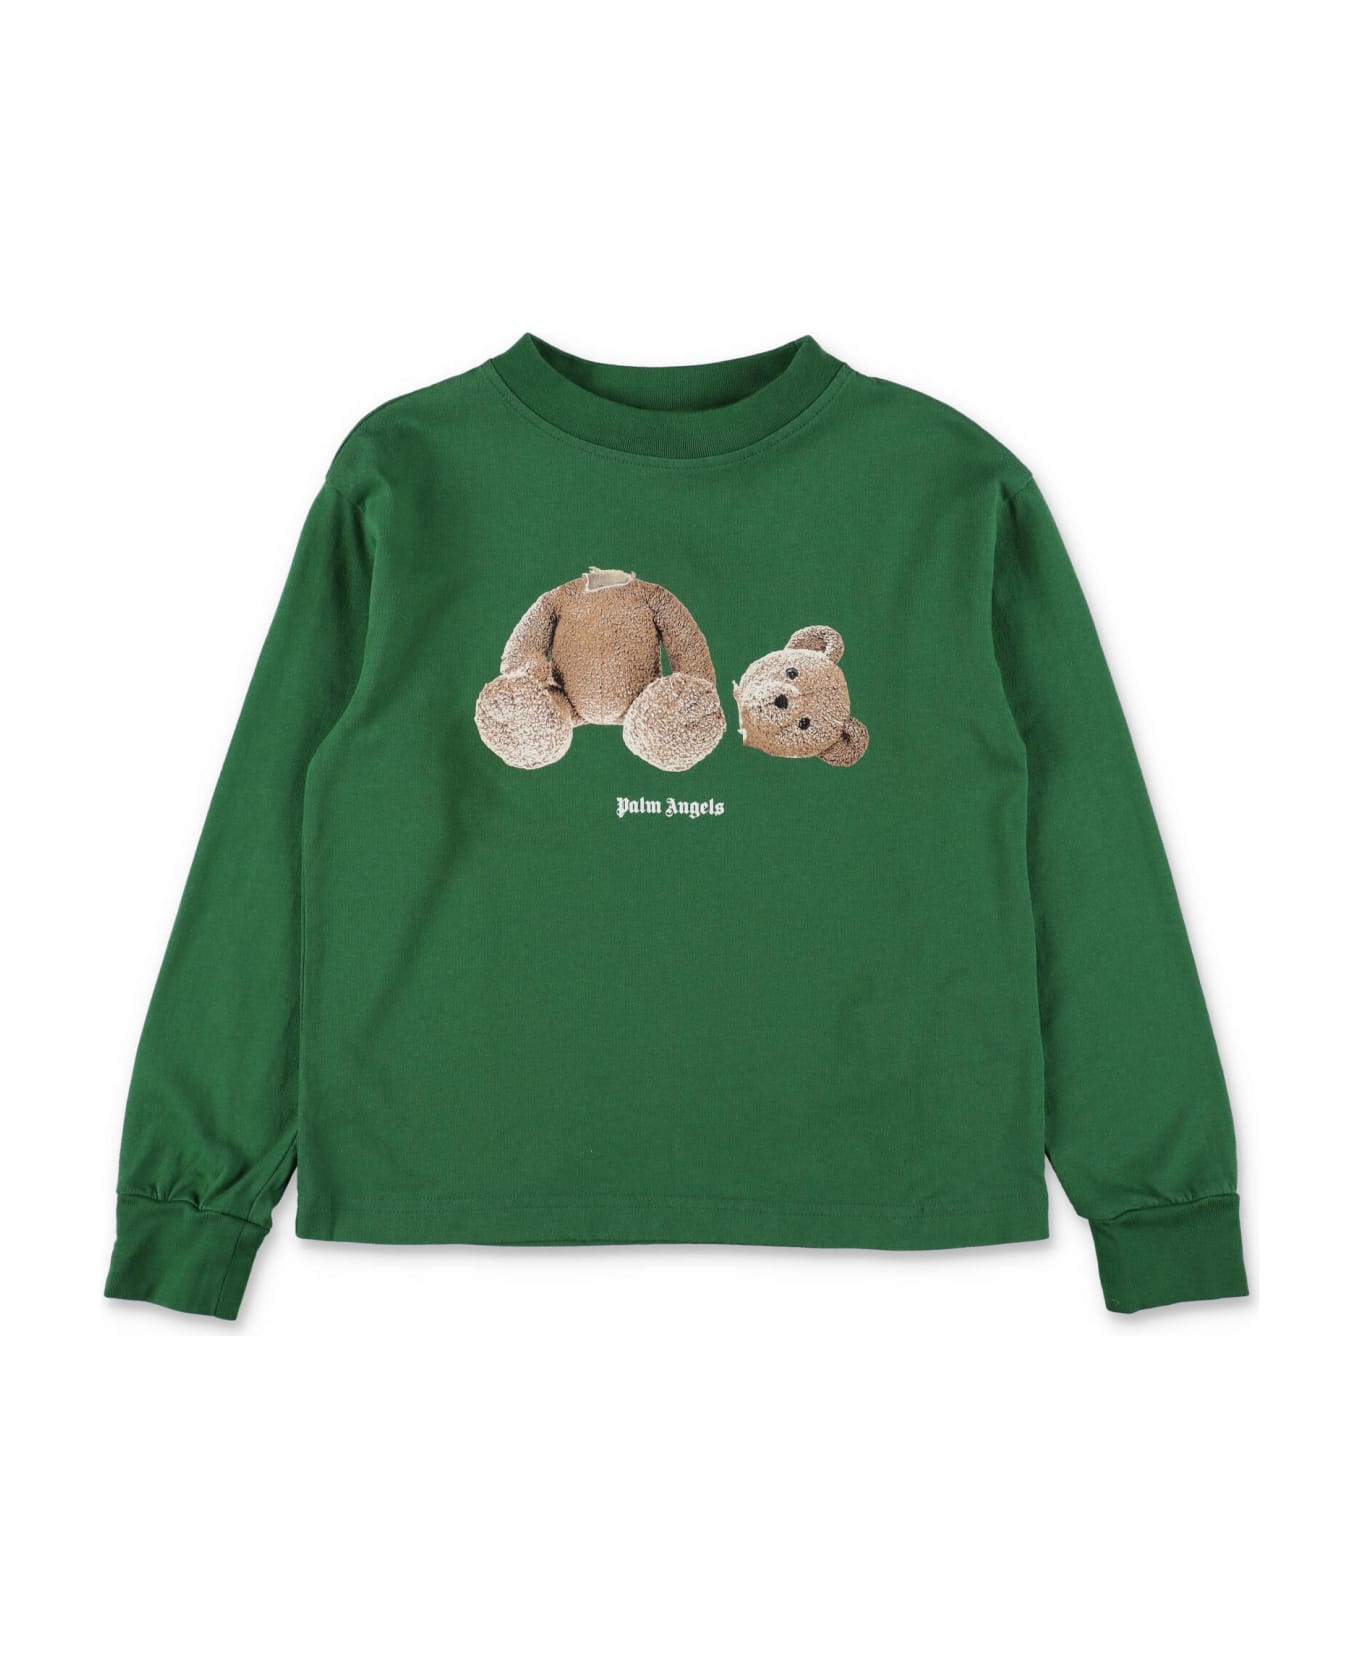 Palm Angels T-shirt Verde In Jersey Di Cotone Bambino - Verde